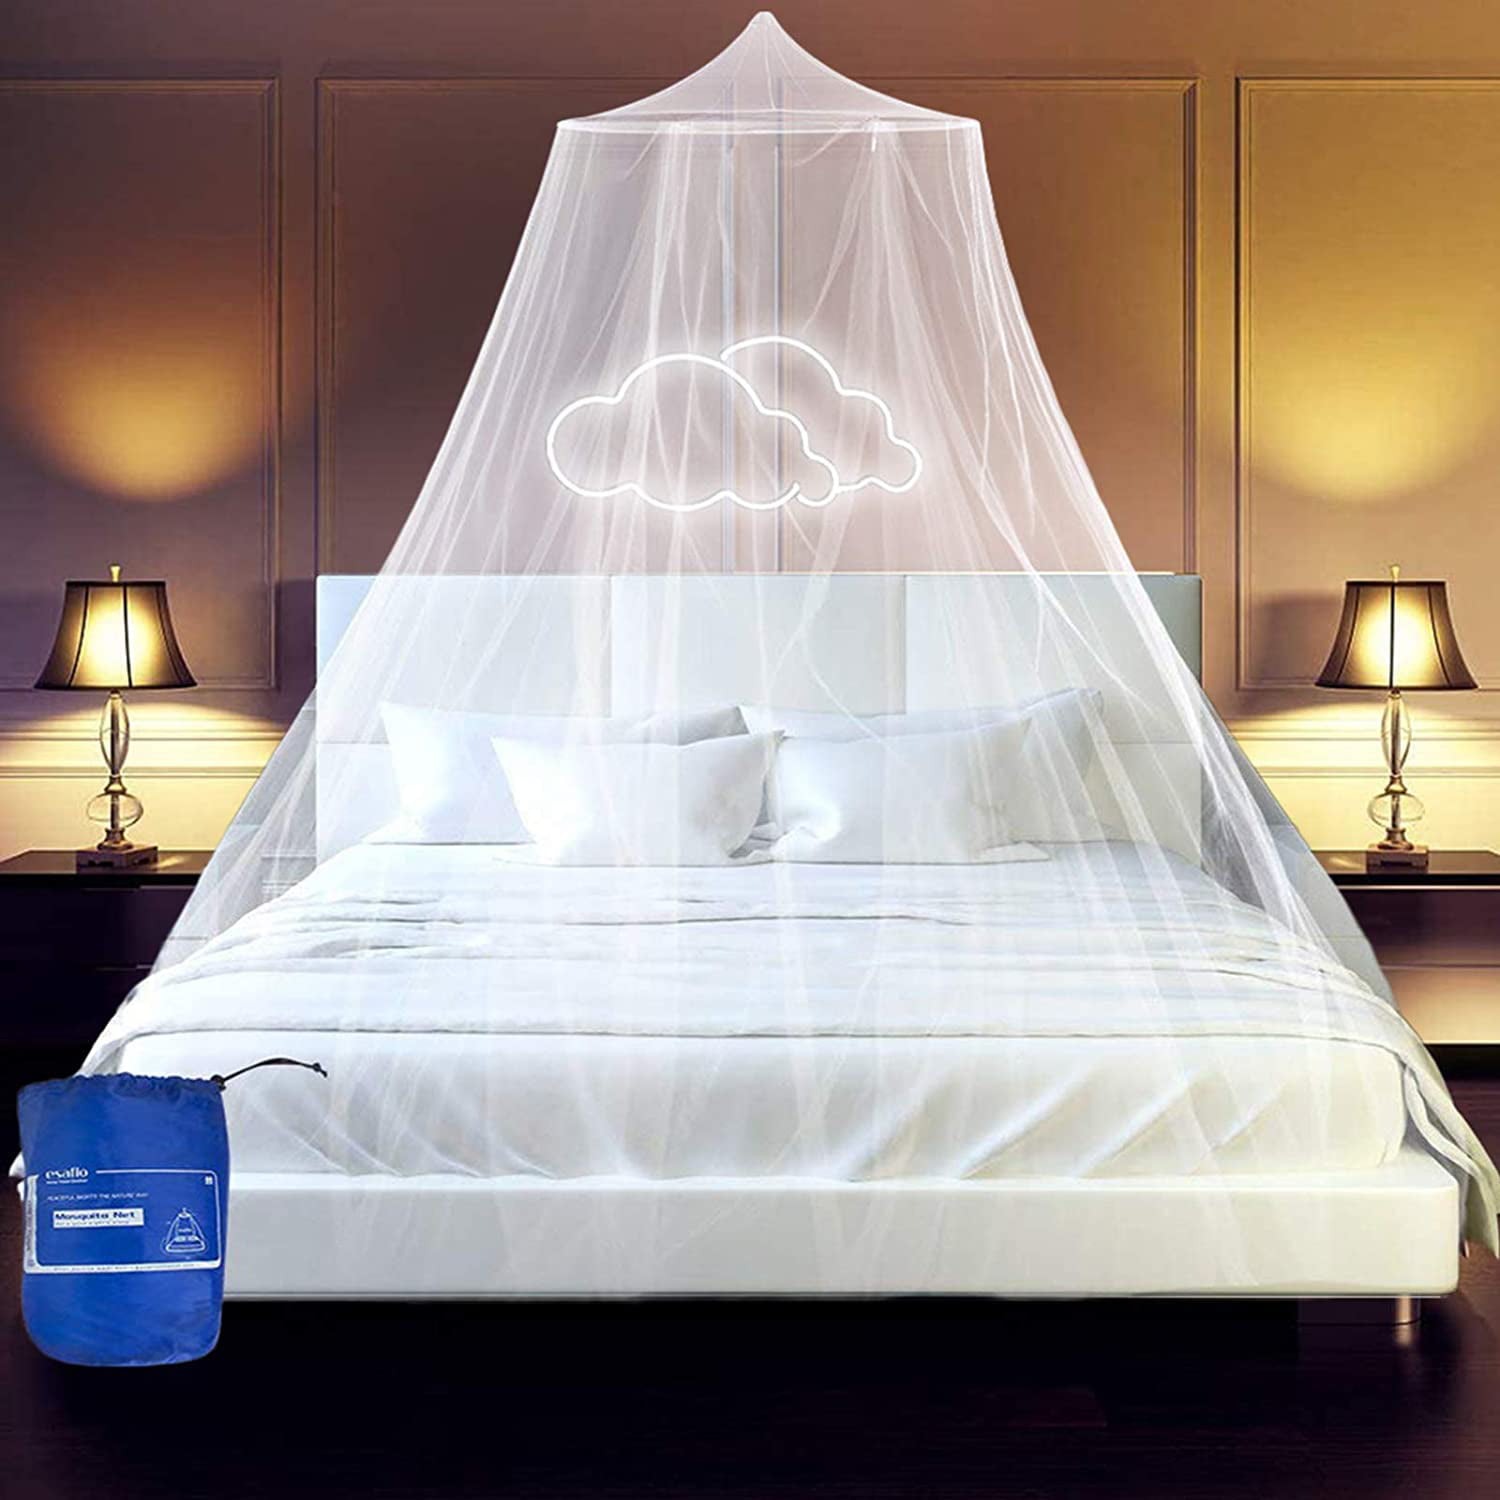 2pcs Mosquito Fly Insect Net Bed Netting For Single Double King Size Box Shape 